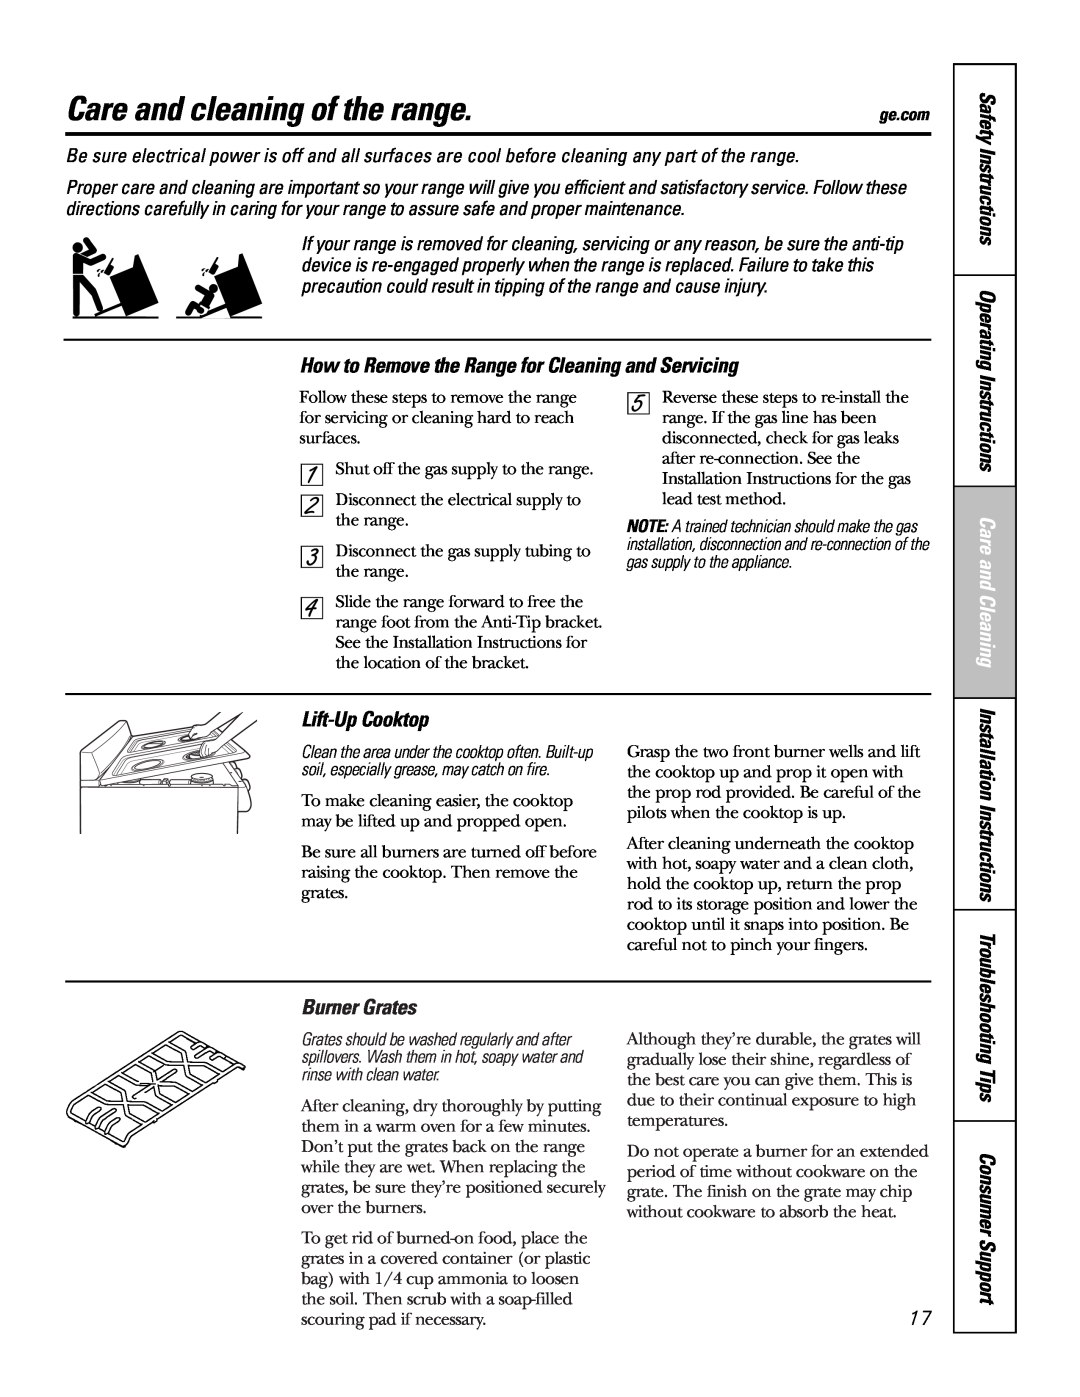 GE JGAS02 Care and cleaning of the range, Safety Instructions Operating, Instructions Care and Cleaning, Lift-UpCooktop 